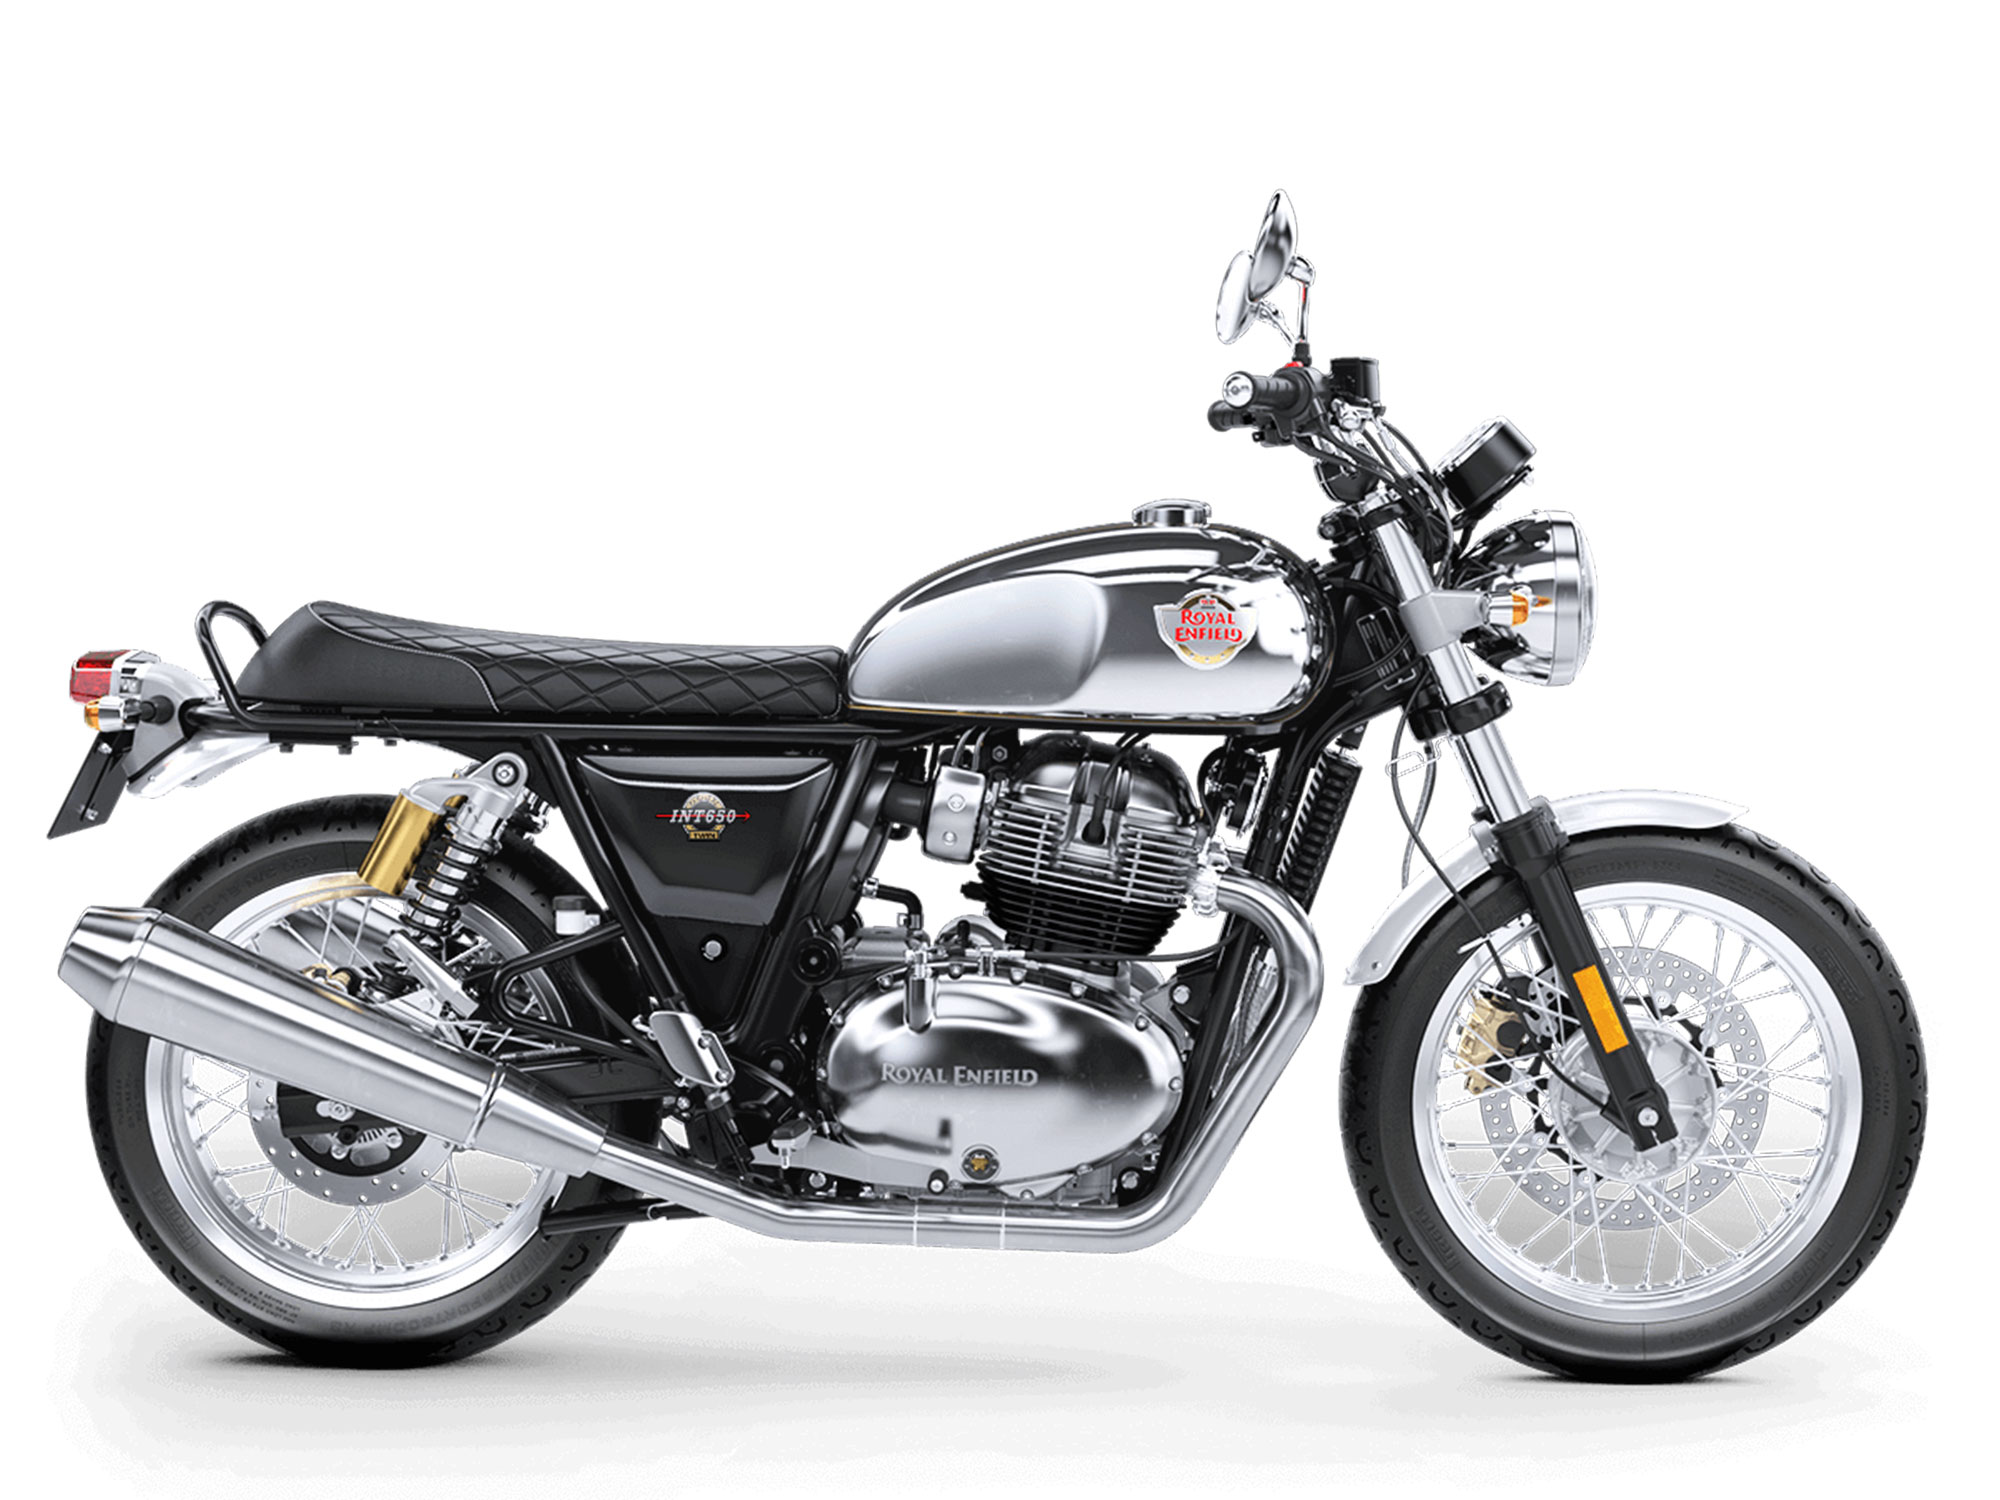 2021 Royal Enfield INT650 Buyer's Guide: Specs, Photos, Price